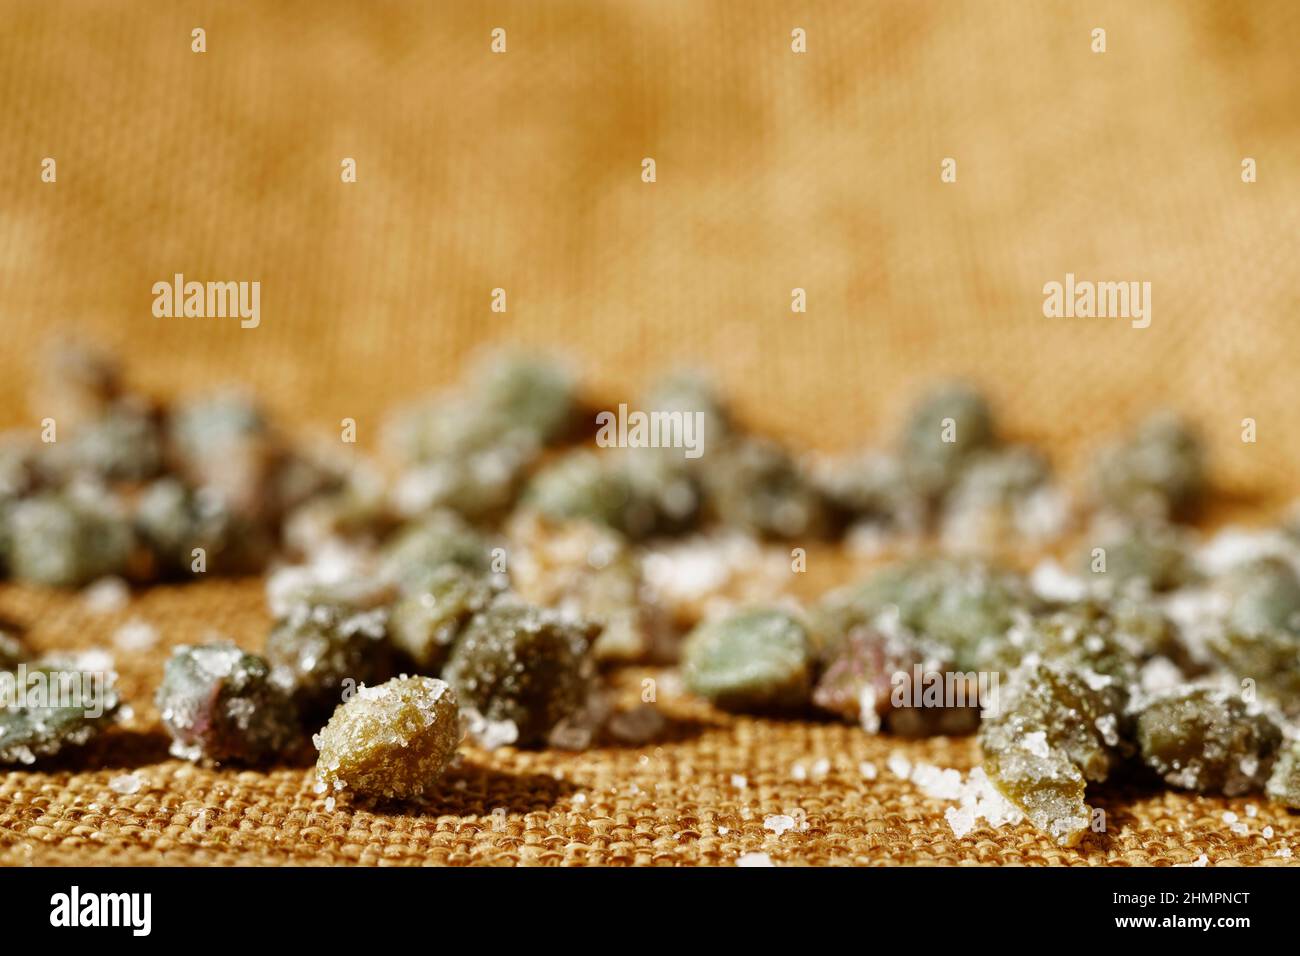 Beautiful green salted capers on brown cotton cloth Stock Photo